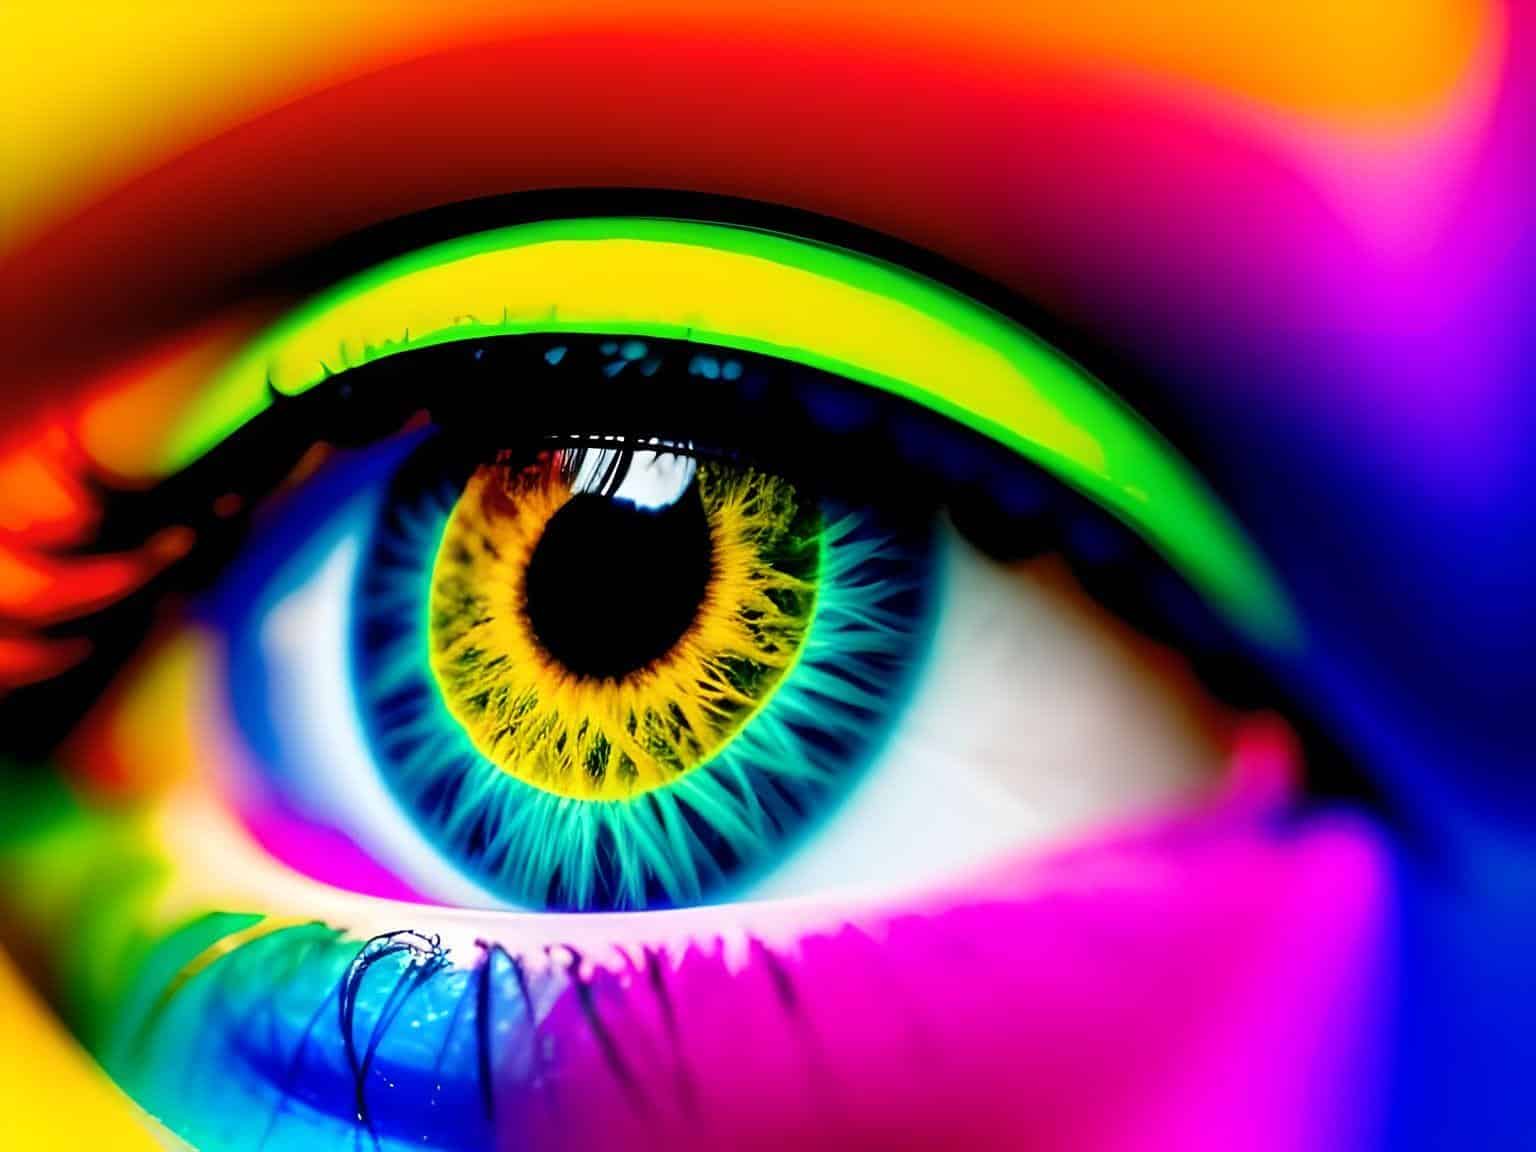 A vibrant image showing an open eye surrounded by colorful abstract shapes, representing clairvoyance